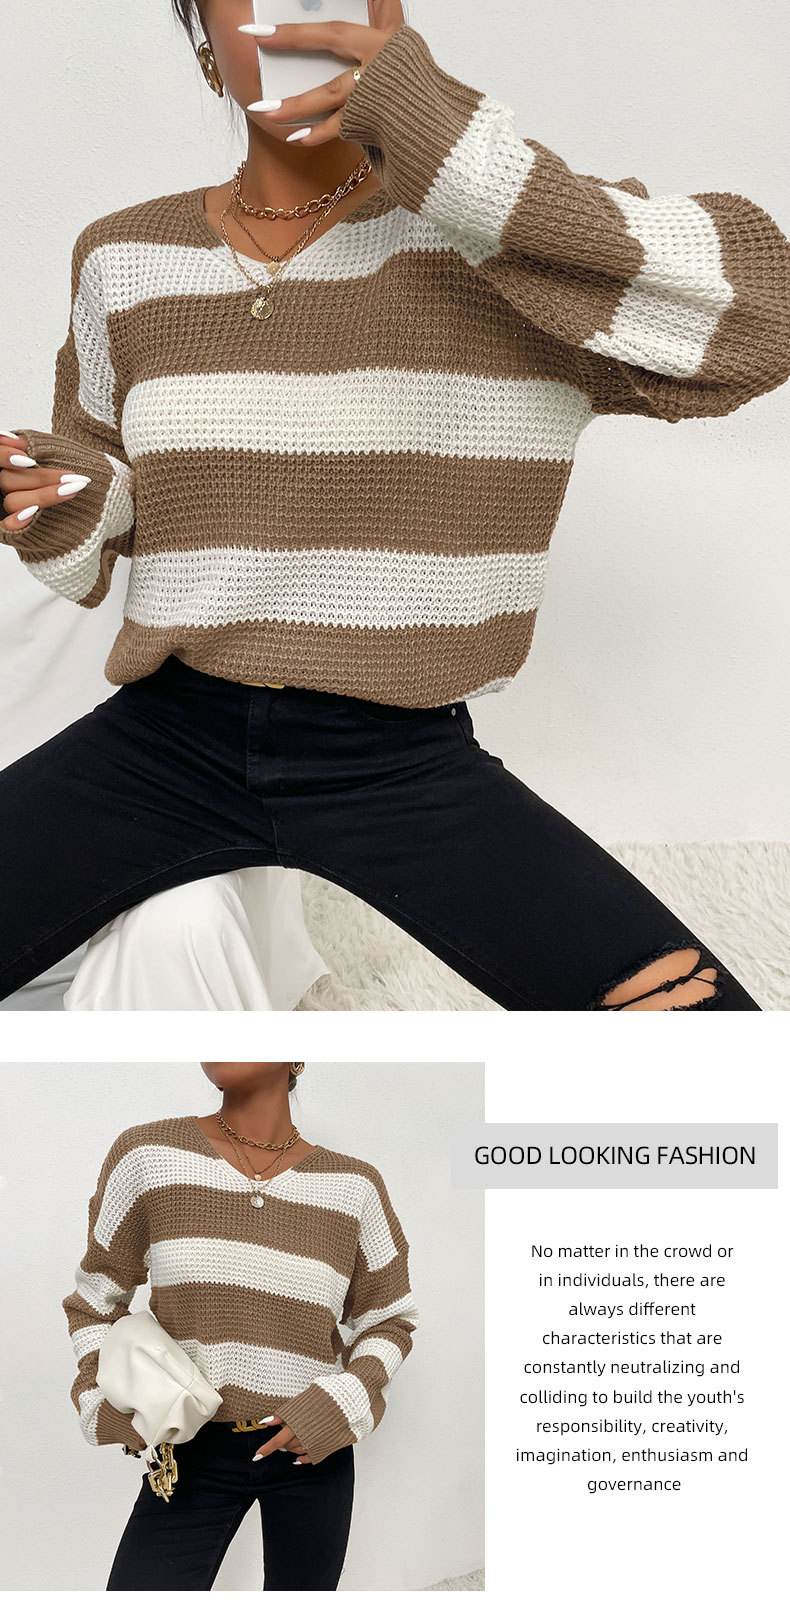 V-neck striped pullover sweater nihaostyles clothing wholesale NSDMB89280